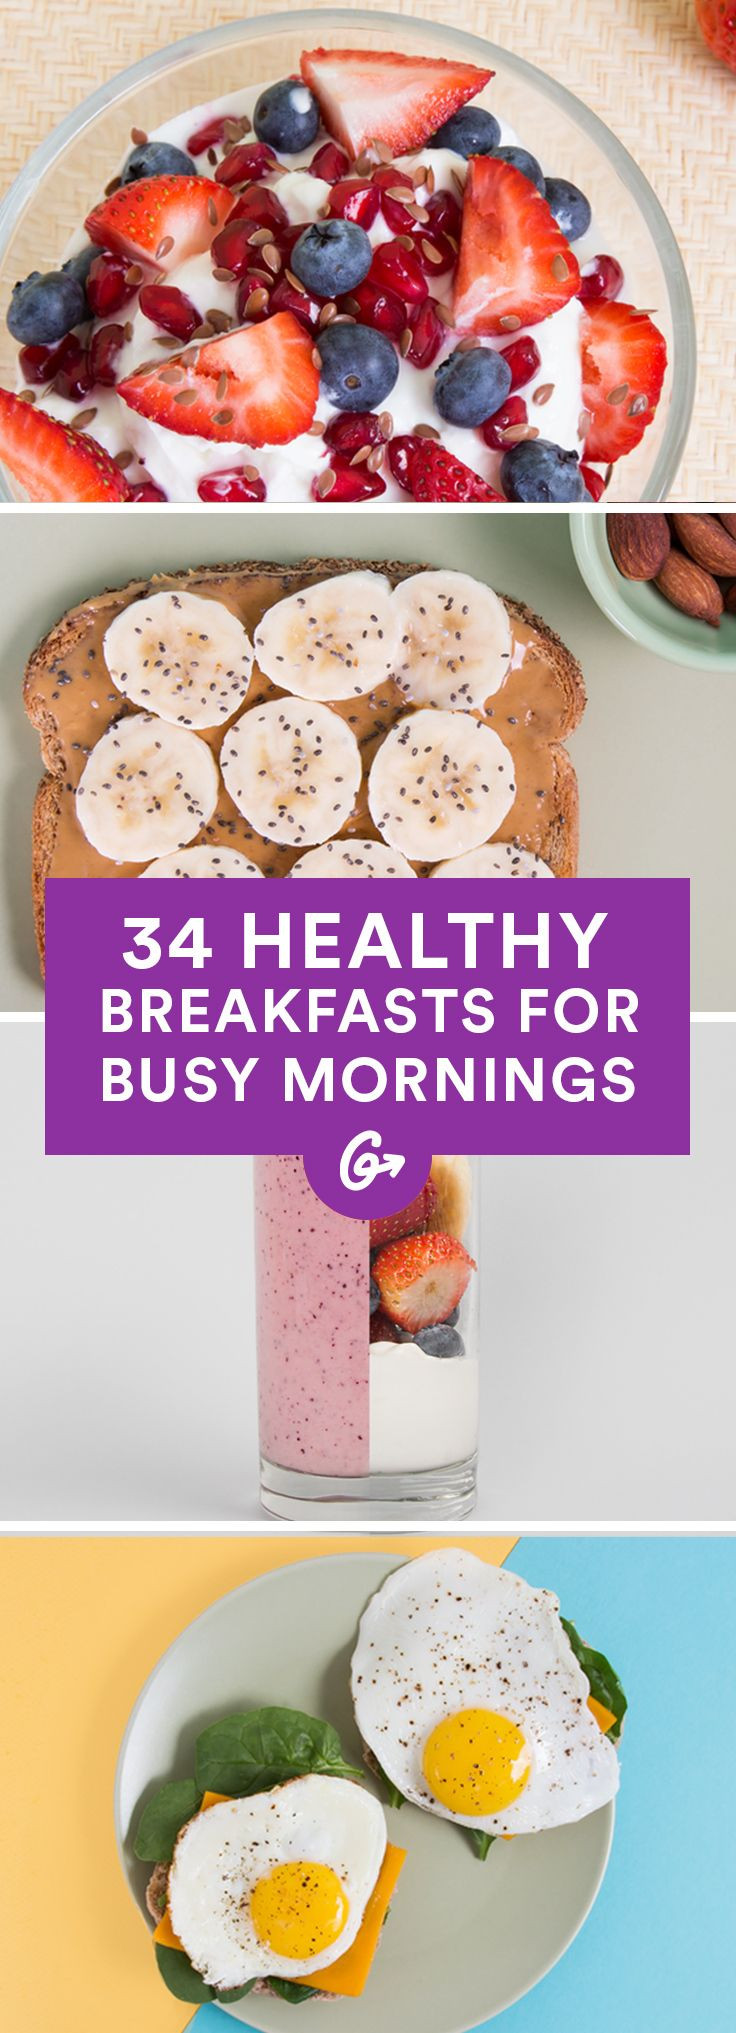 Healthy Breakfast Fast Food
 31 Fast and Healthy Breakfasts With images